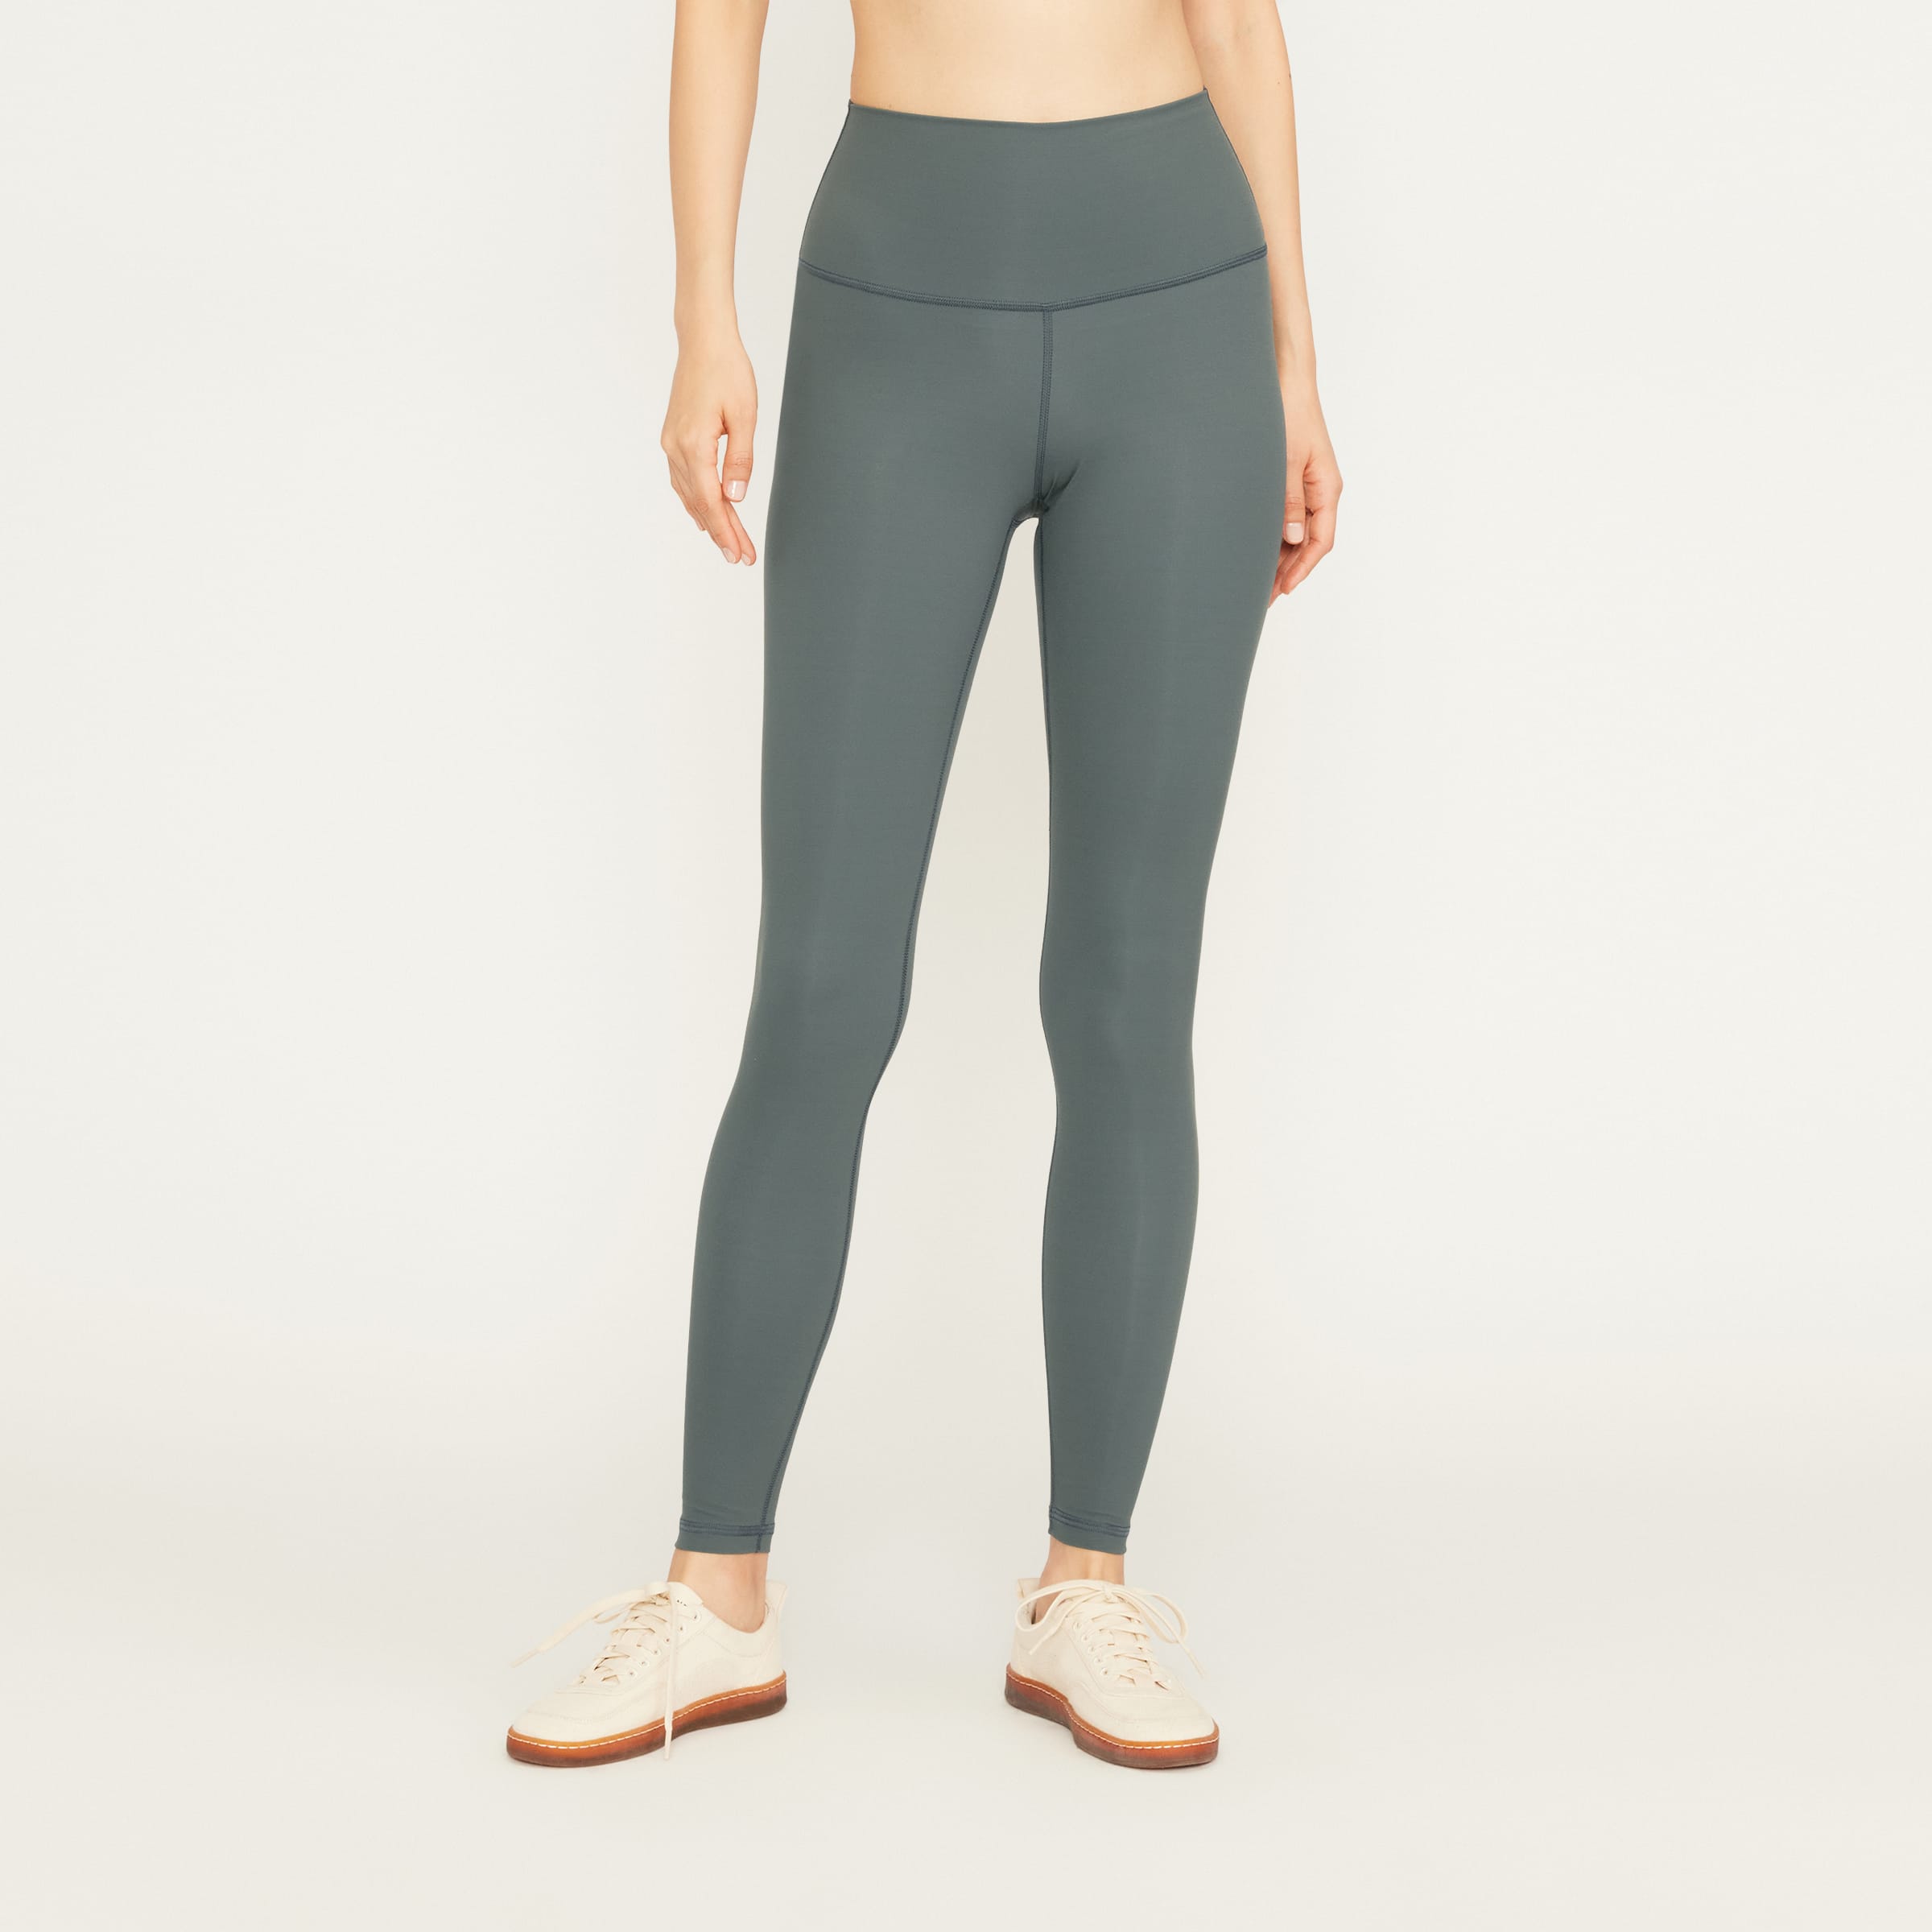 Everlane Perform leggings review: Do they really 'do it all'? - Reviewed